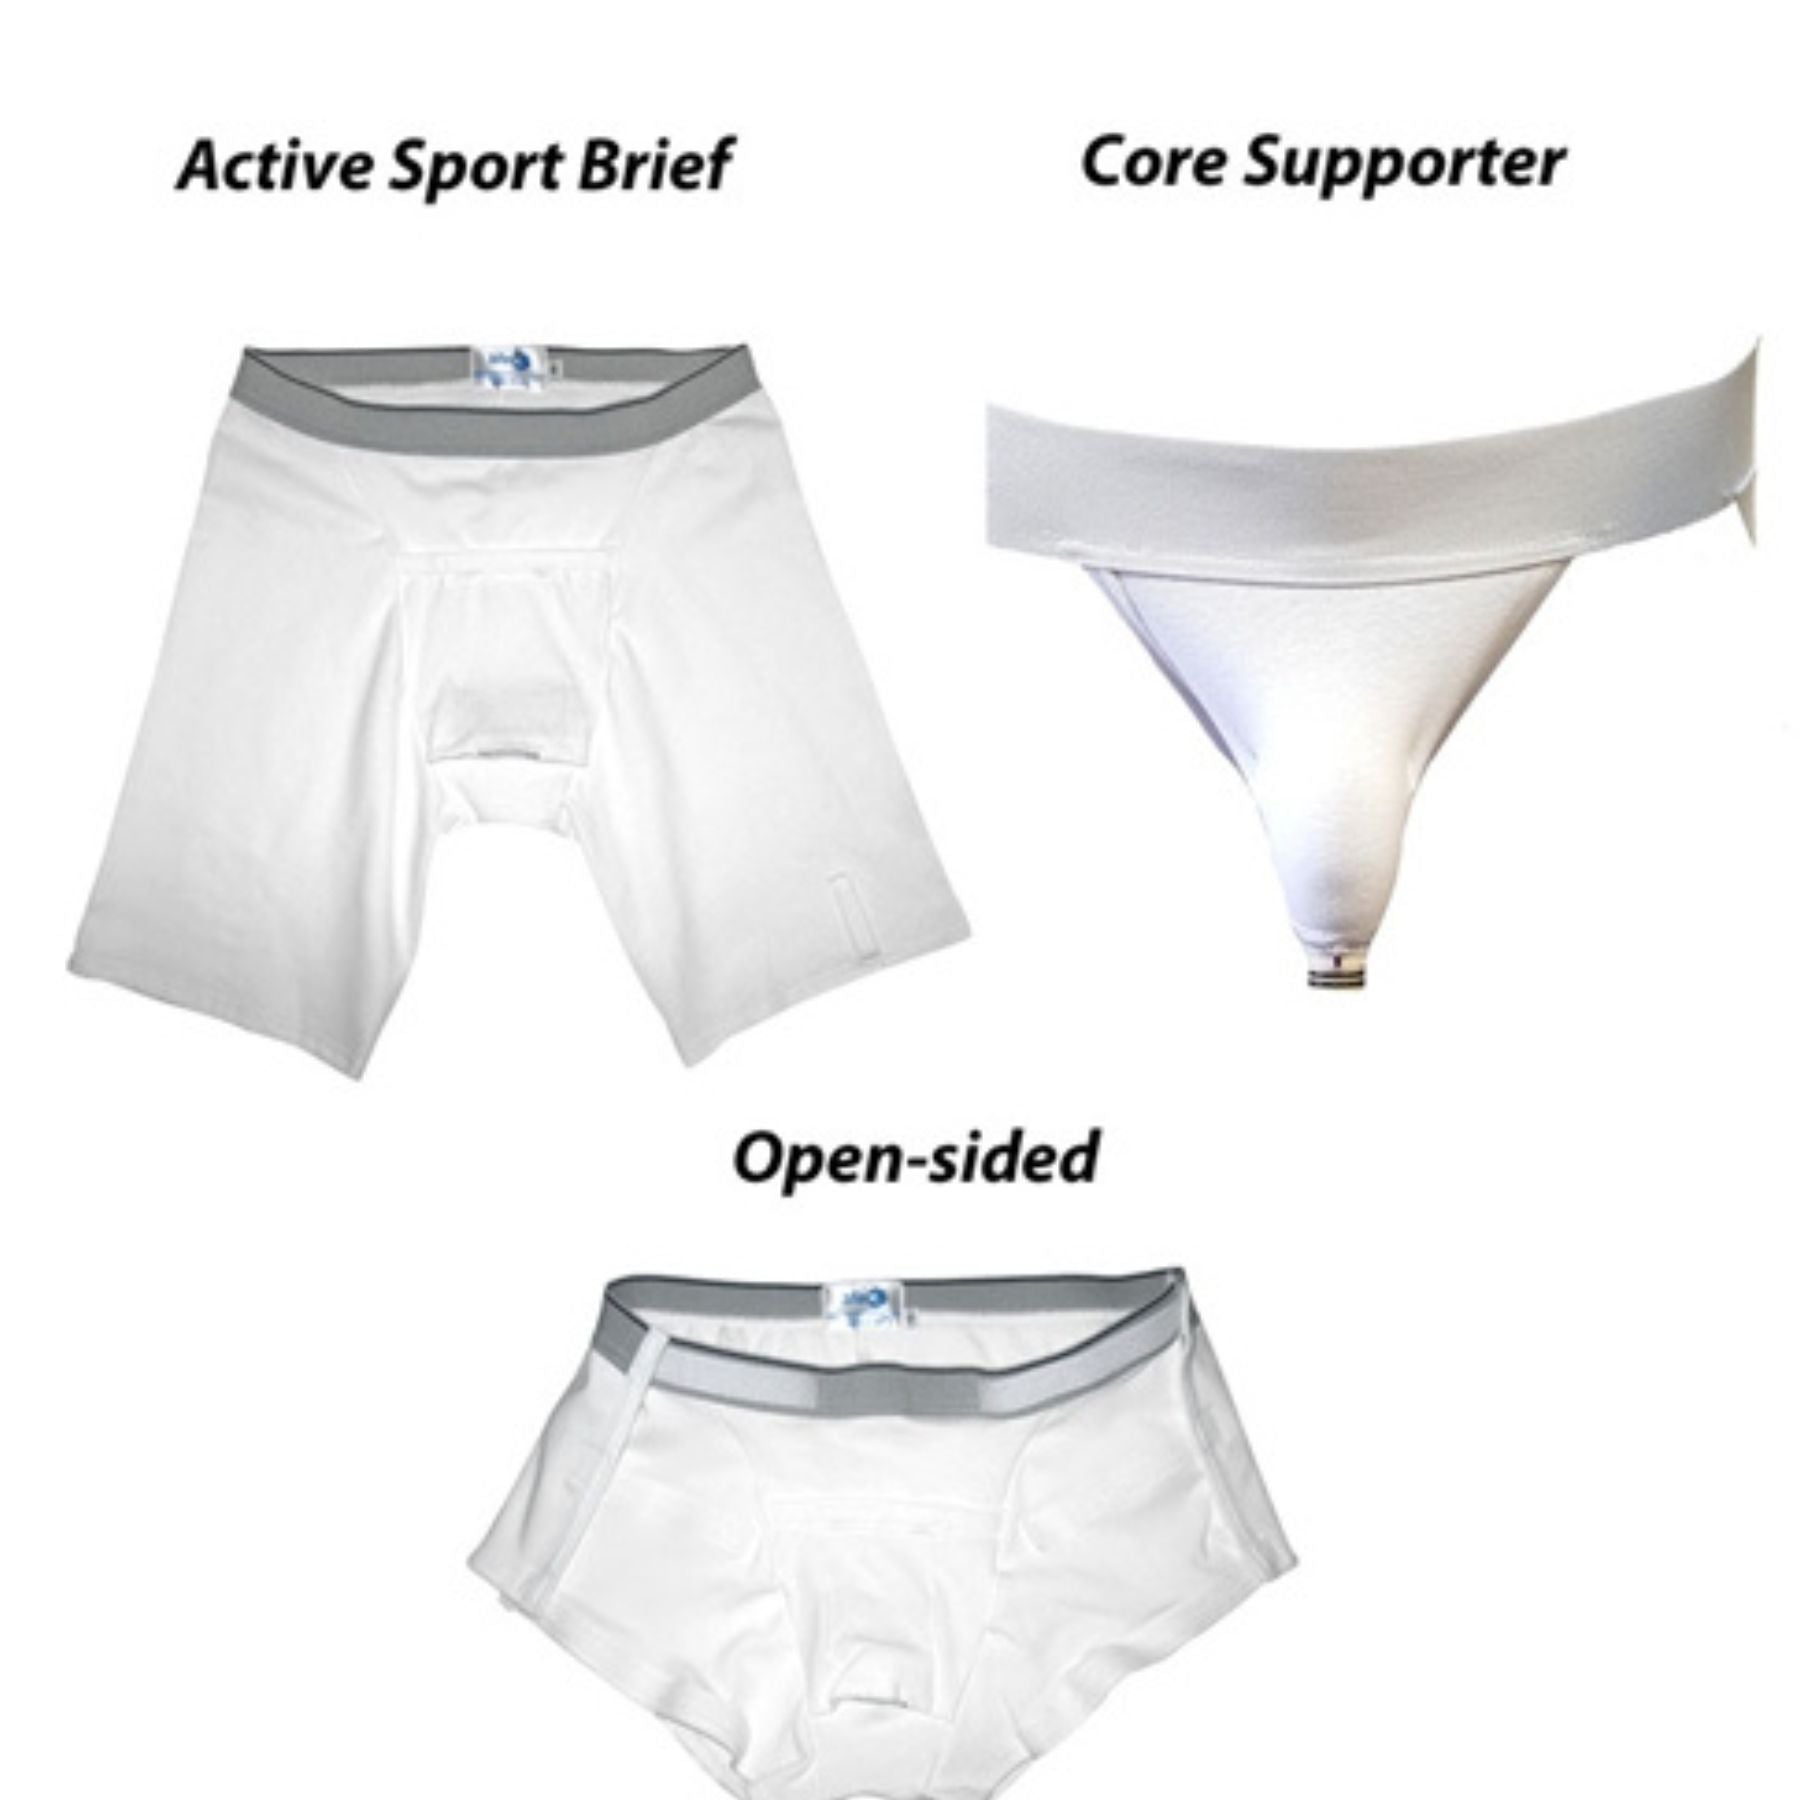 Afex Active Sport, Core Supporter and Open-Sided Briefs